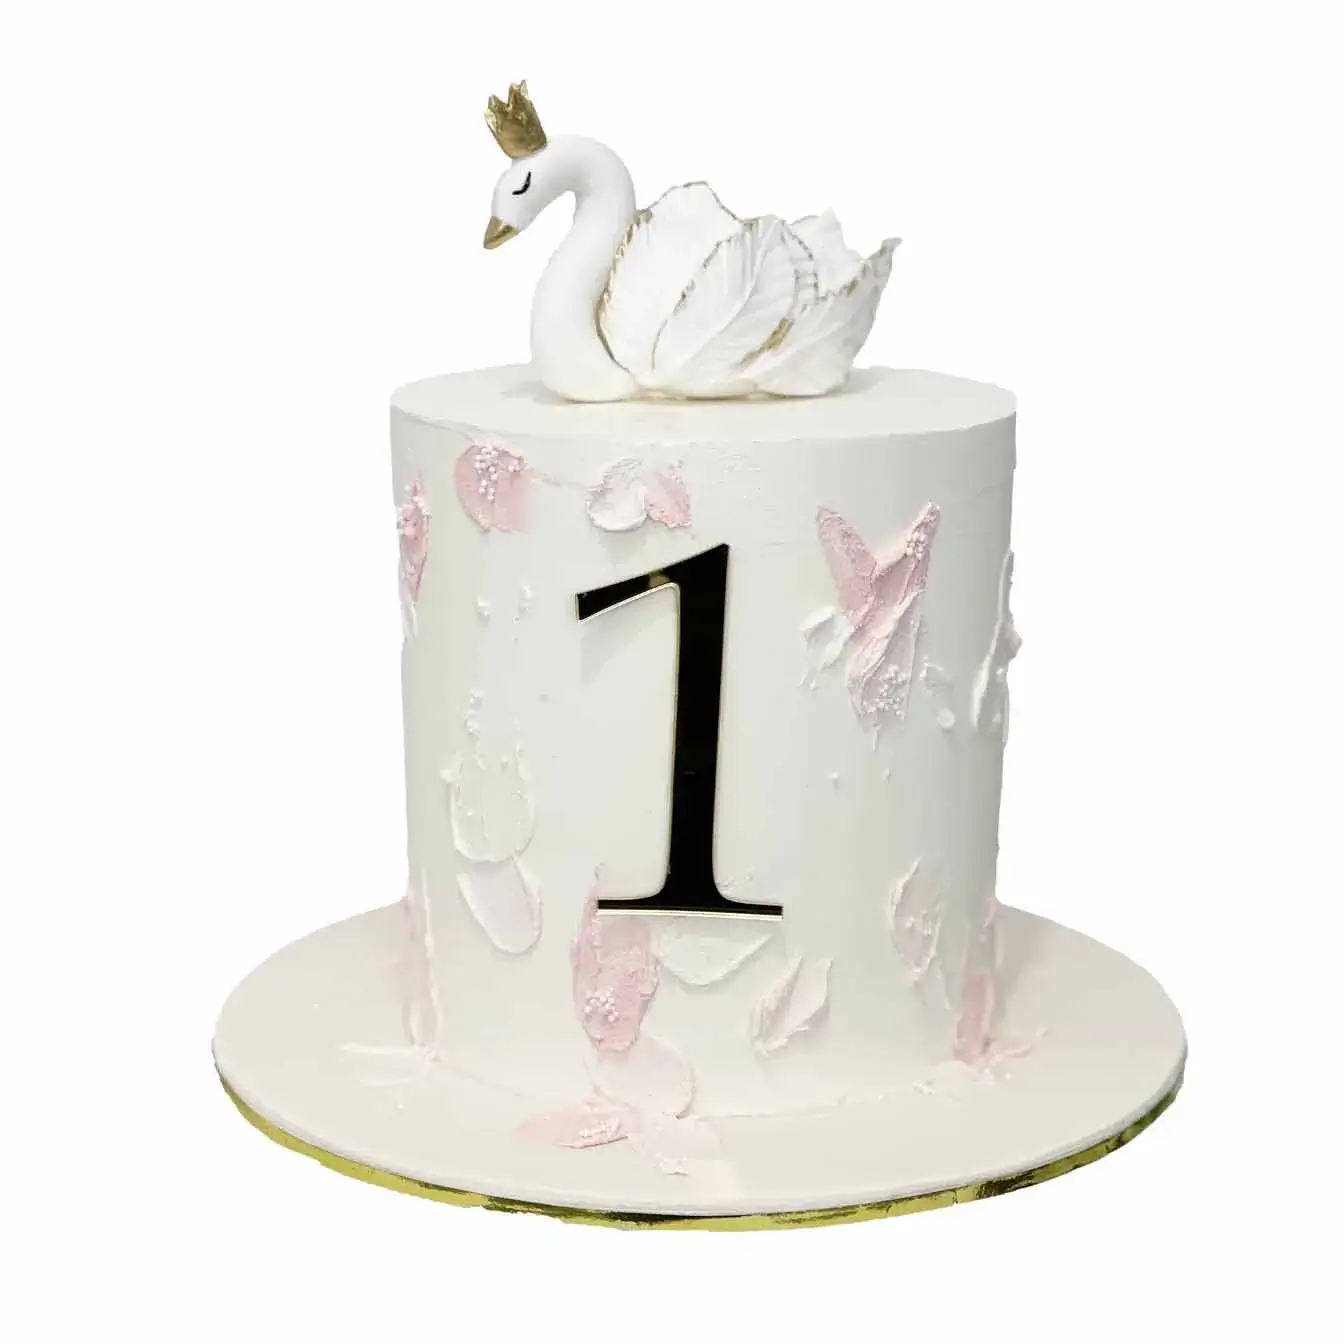 Swan Lake Elegance Cake - A two-tier cake with white and pink watercolor design and a hand-molded swan on top, a stunning centerpiece for weddings and celebrations of elegance.